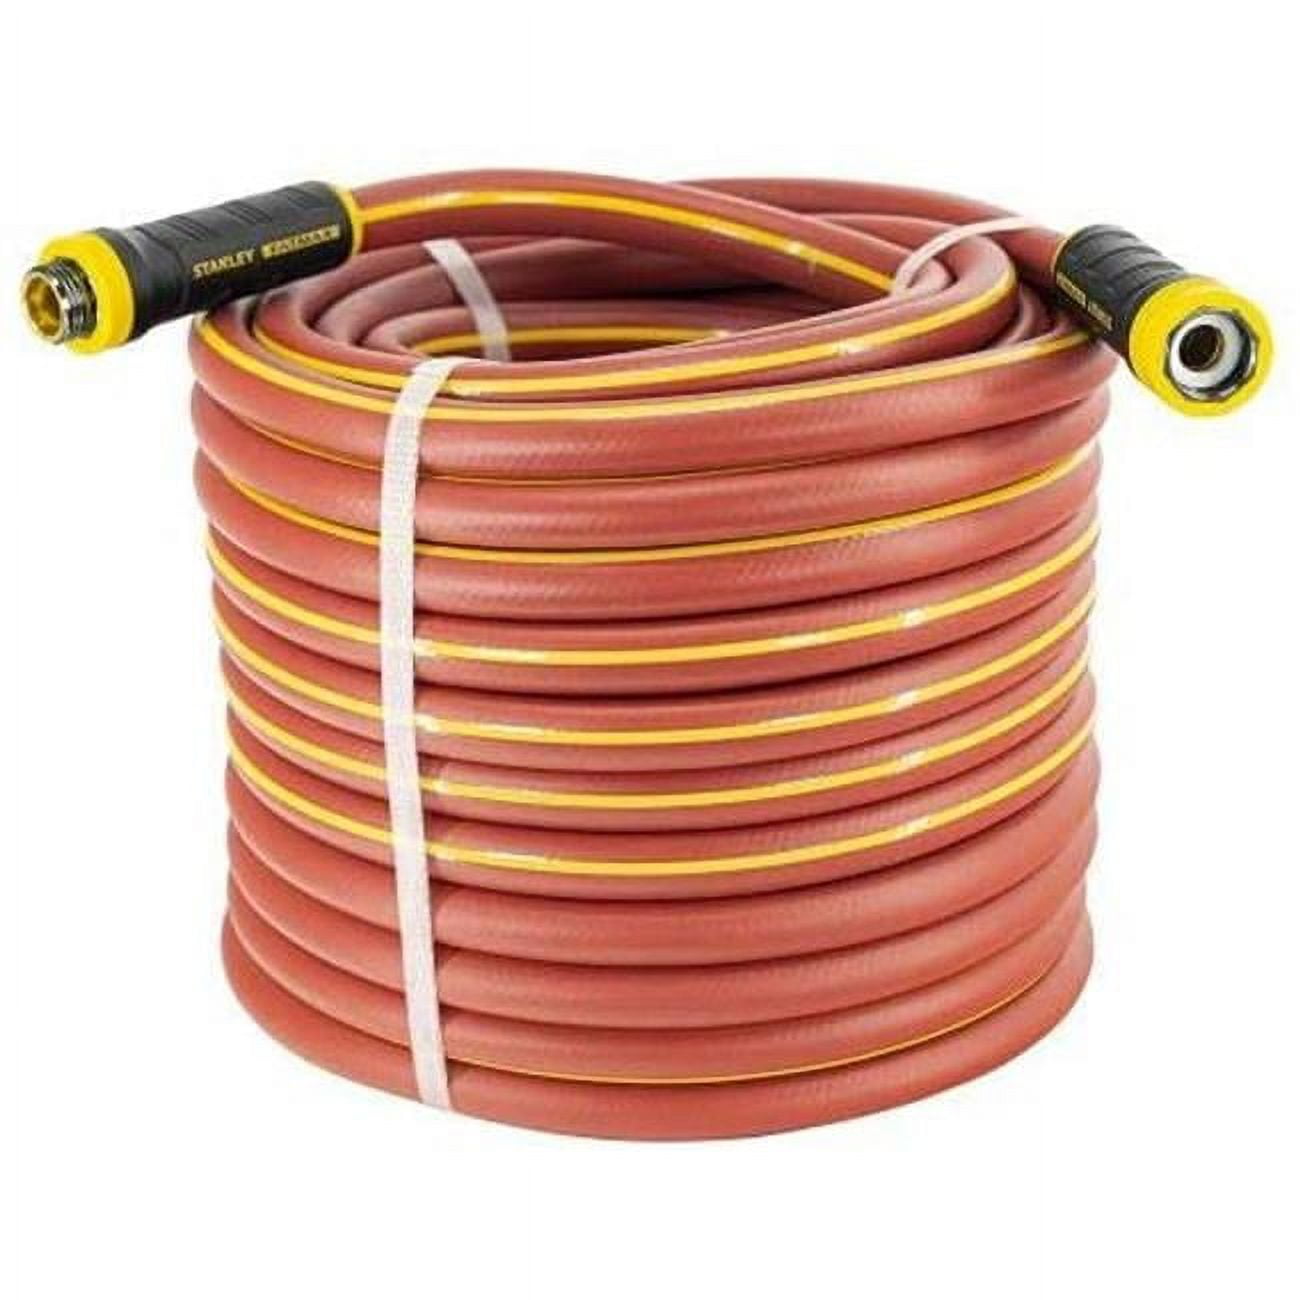  Stanley Garden BDS7939 FATMAX Polyfusion Hot Water Hose, 100' x  5/8, 100-ft, Red : Everything Else